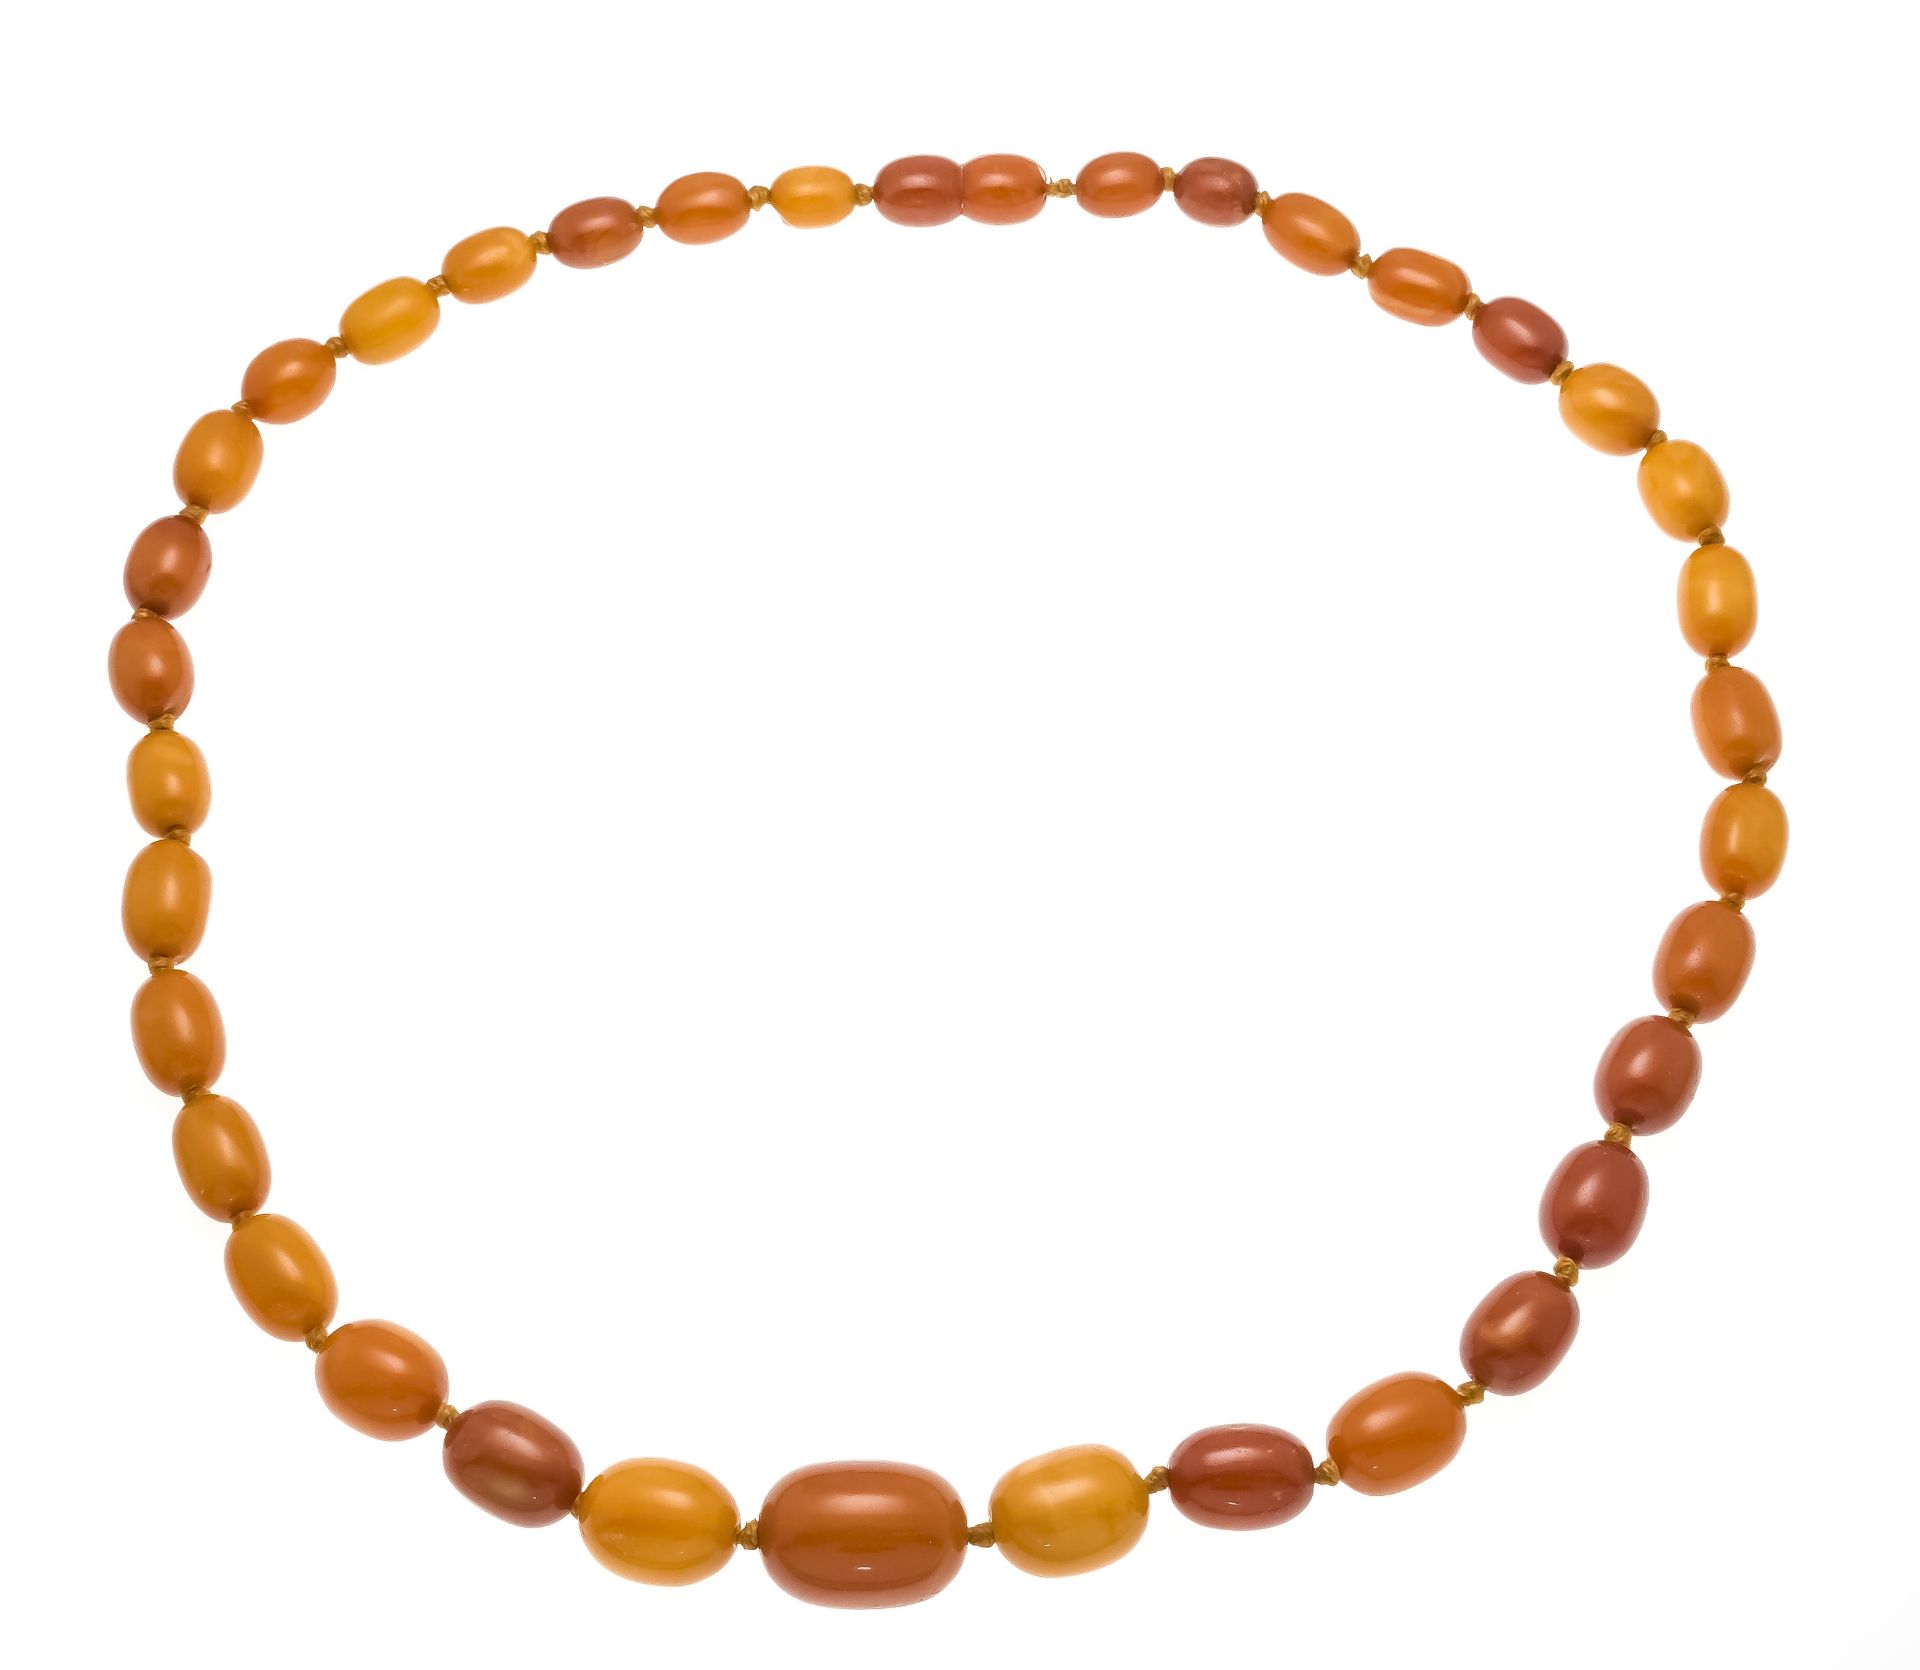 Amber necklace of 35 amber olives 23 x 17 - 11 x 8 mm in lighter to darker butterscotch colors, with